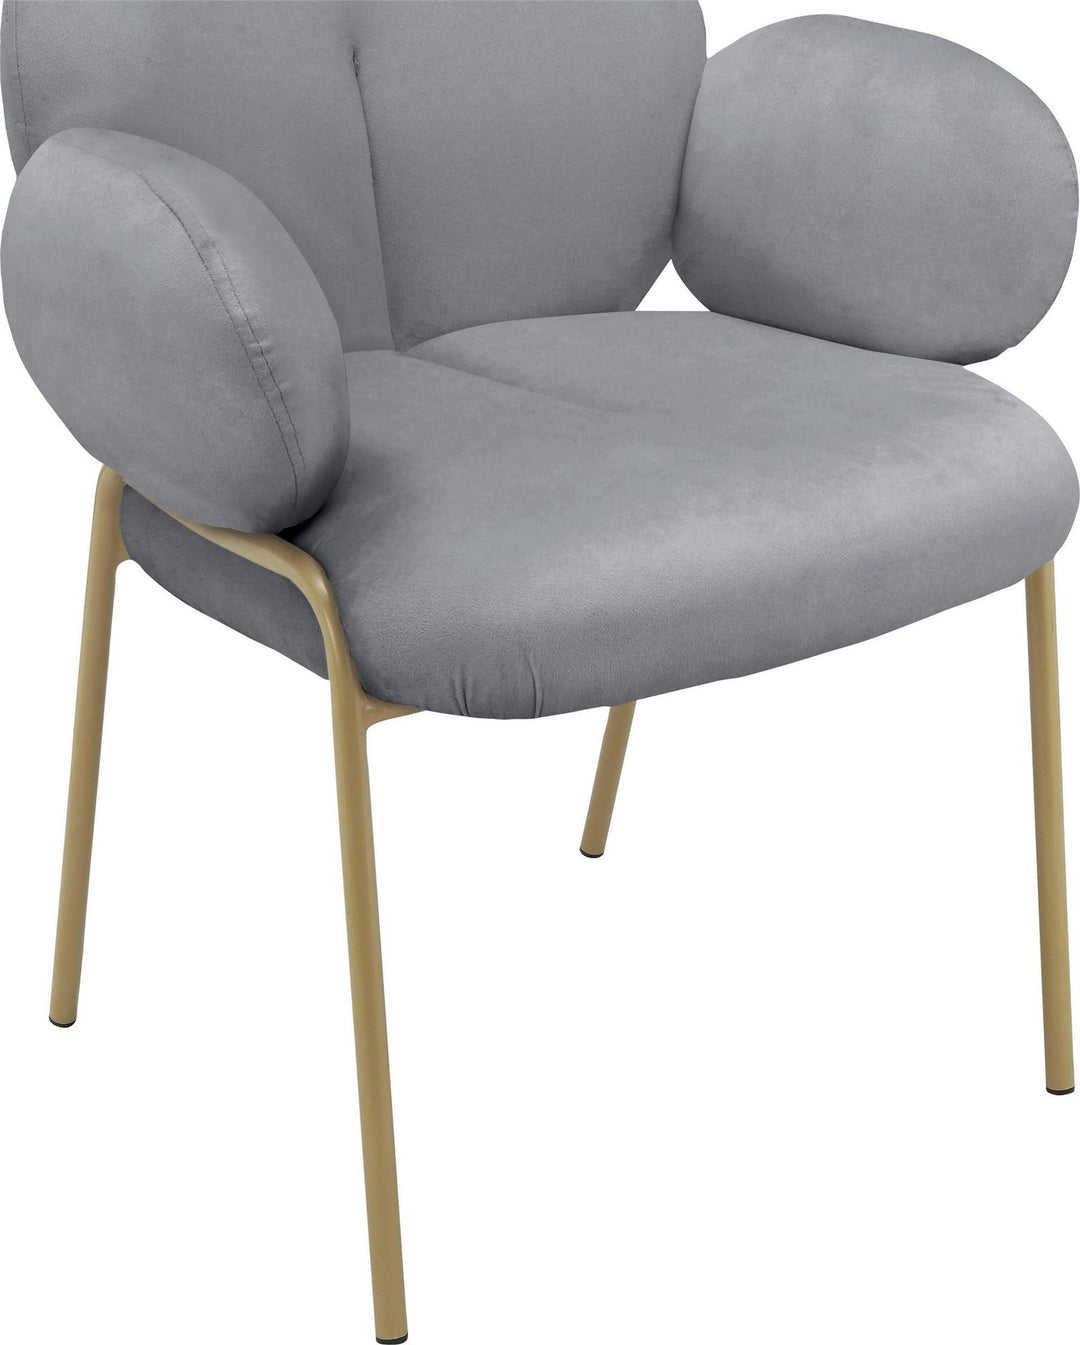 Sanna Dining Chair with Gold Metal Legs, Set of 2 - Gray - Set of 2